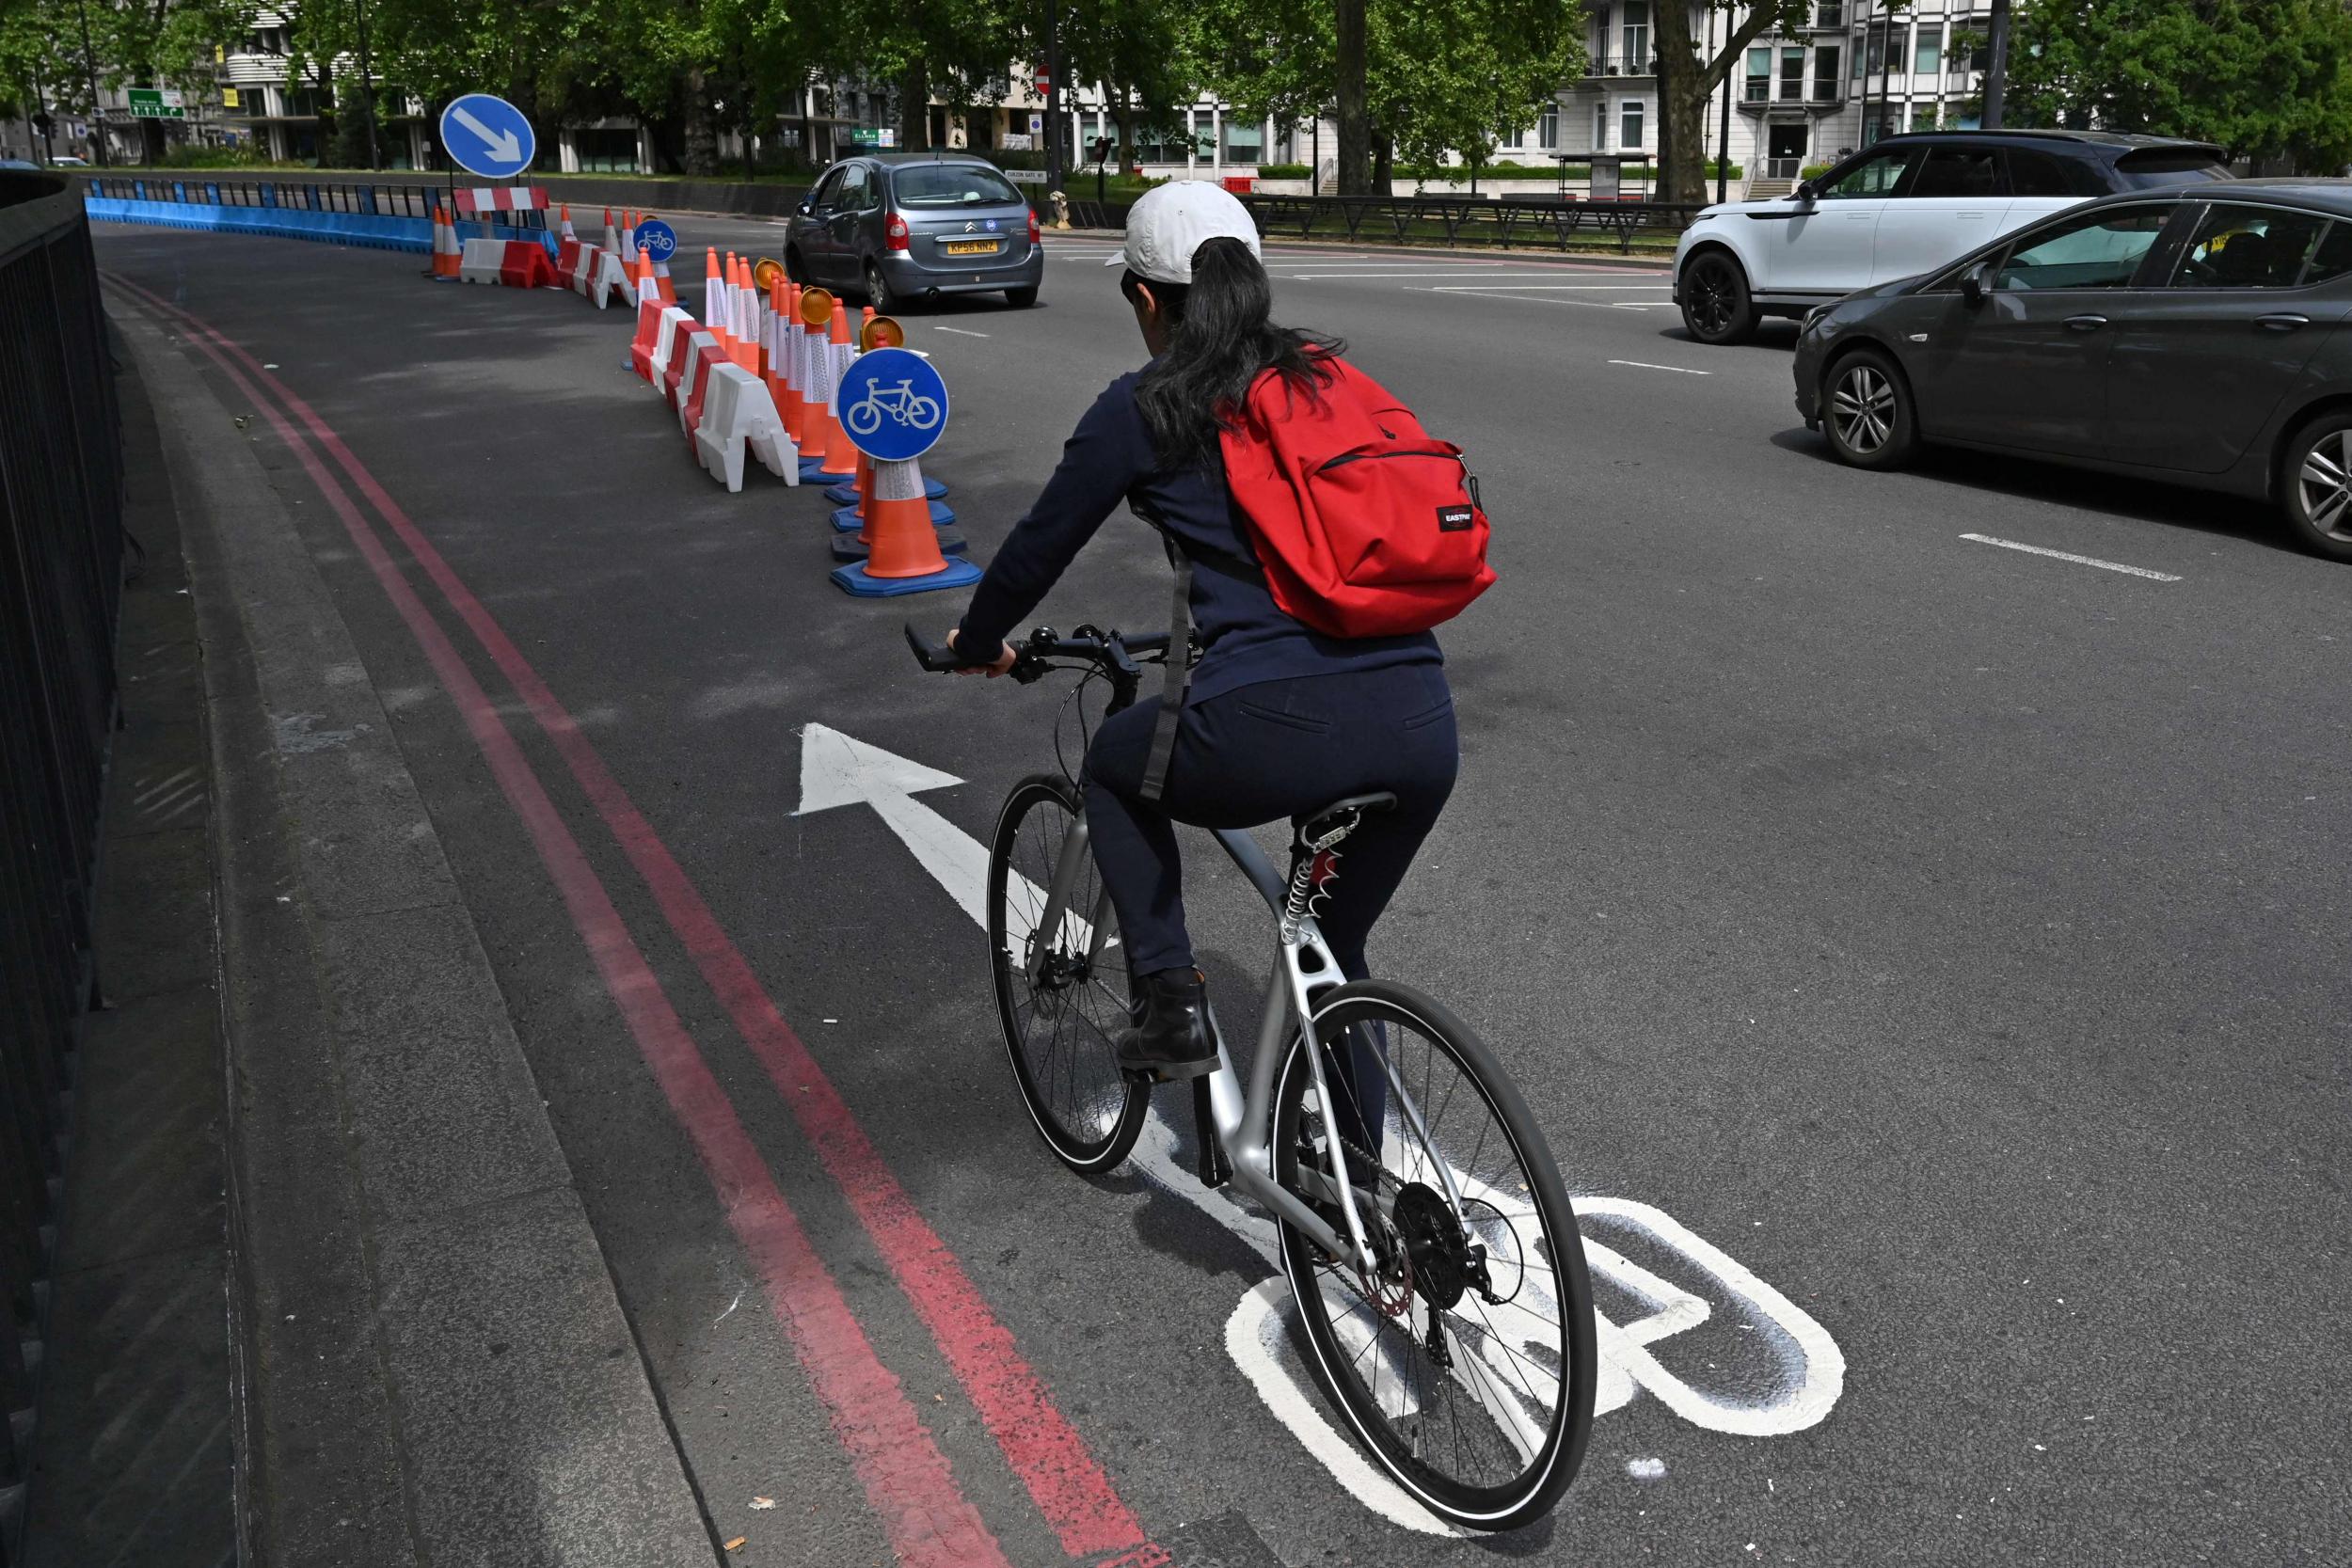 London cycle numbers 'up nearly 120 per cent' amid pandemic bike boom